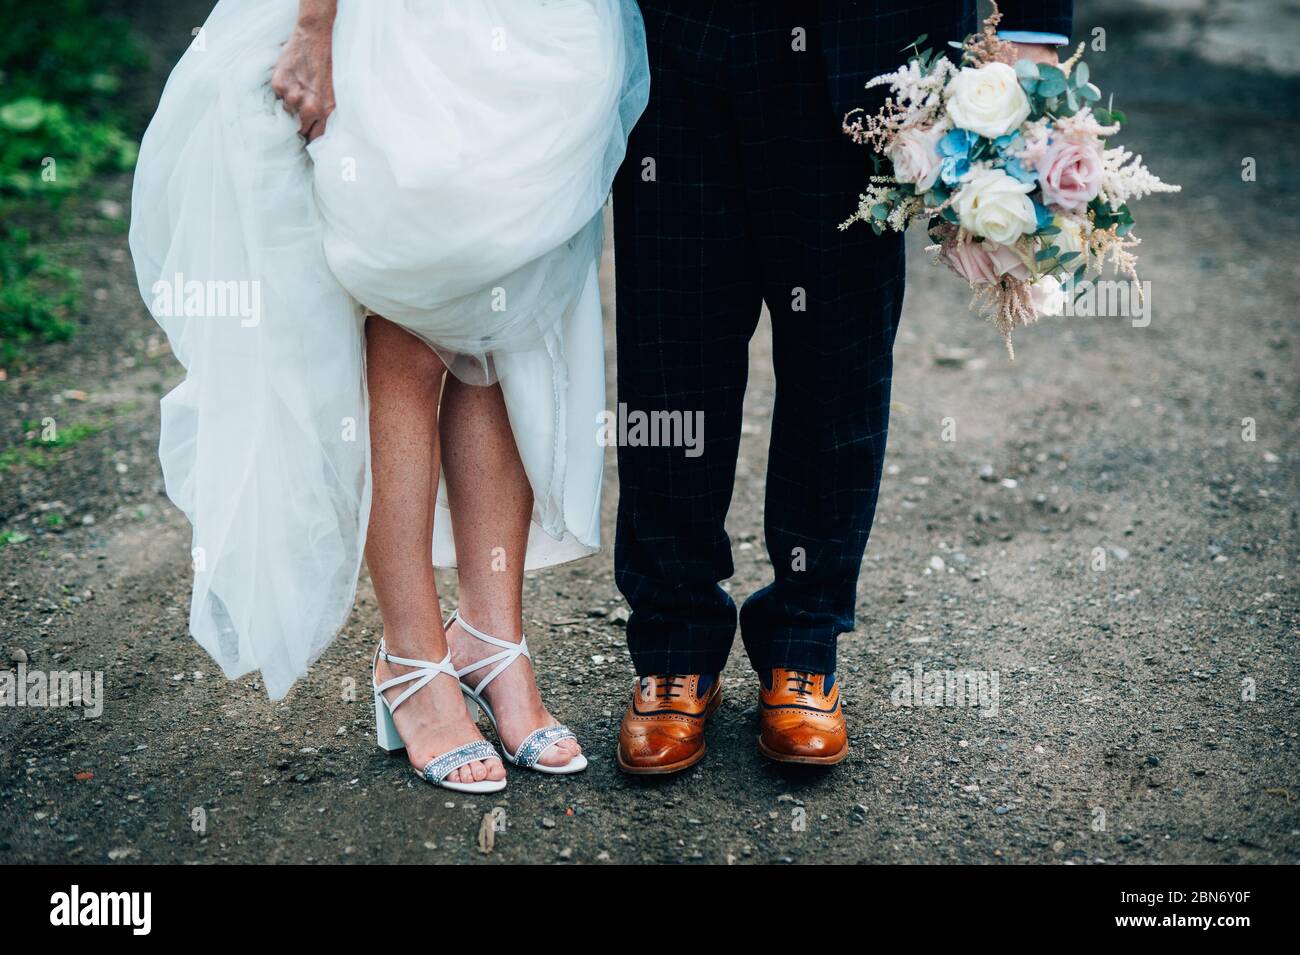 English wedding photograph, bride and groom standing together showing their shoes. Quirky Stock Photo